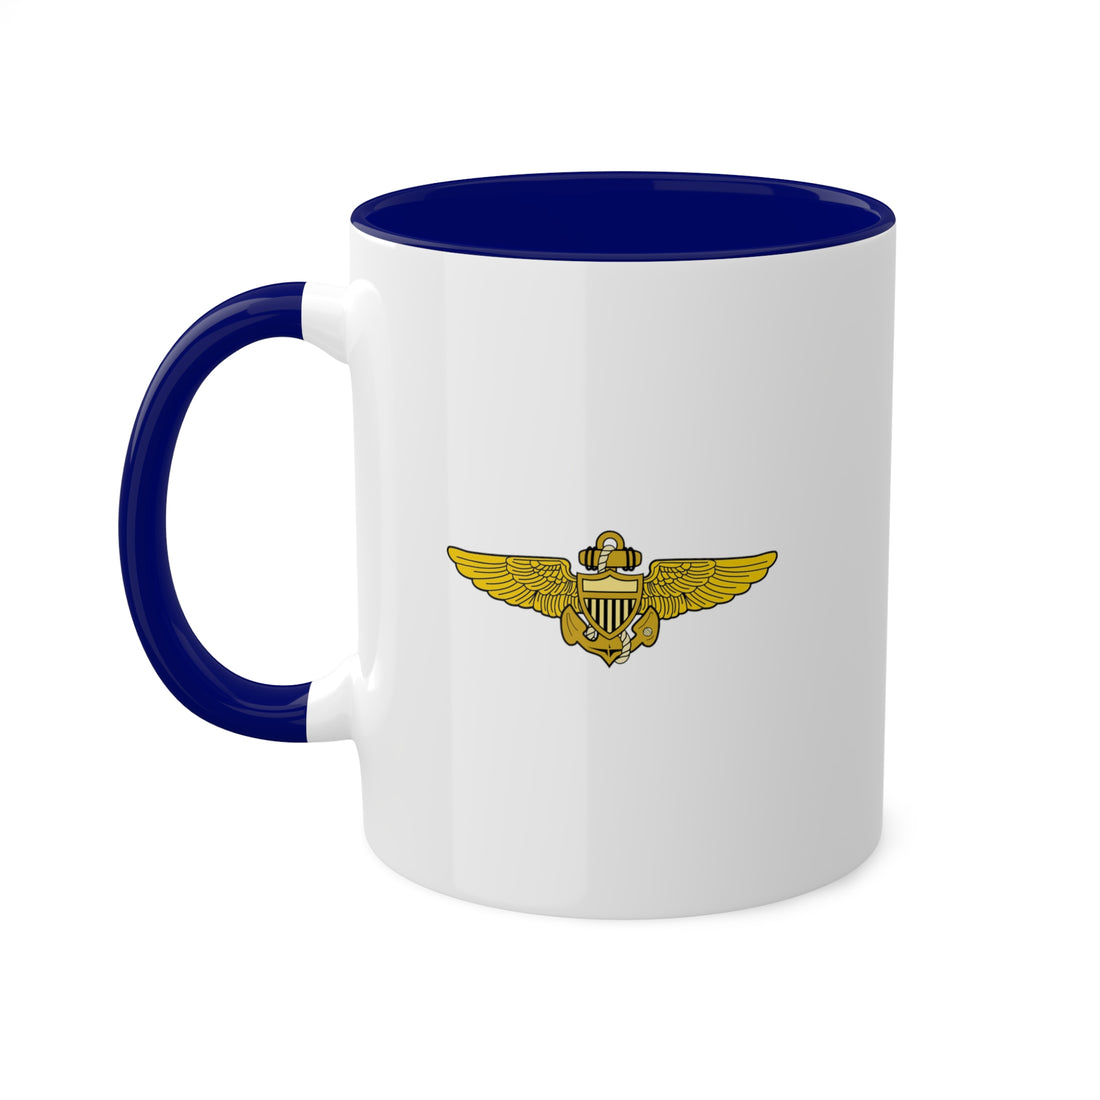 HS-3 "Tridents" Naval Aviator Wings 10oz. Coffee Mug, Navy Helicopter Antisubmarine Squadron flying the SH-3 Sea King